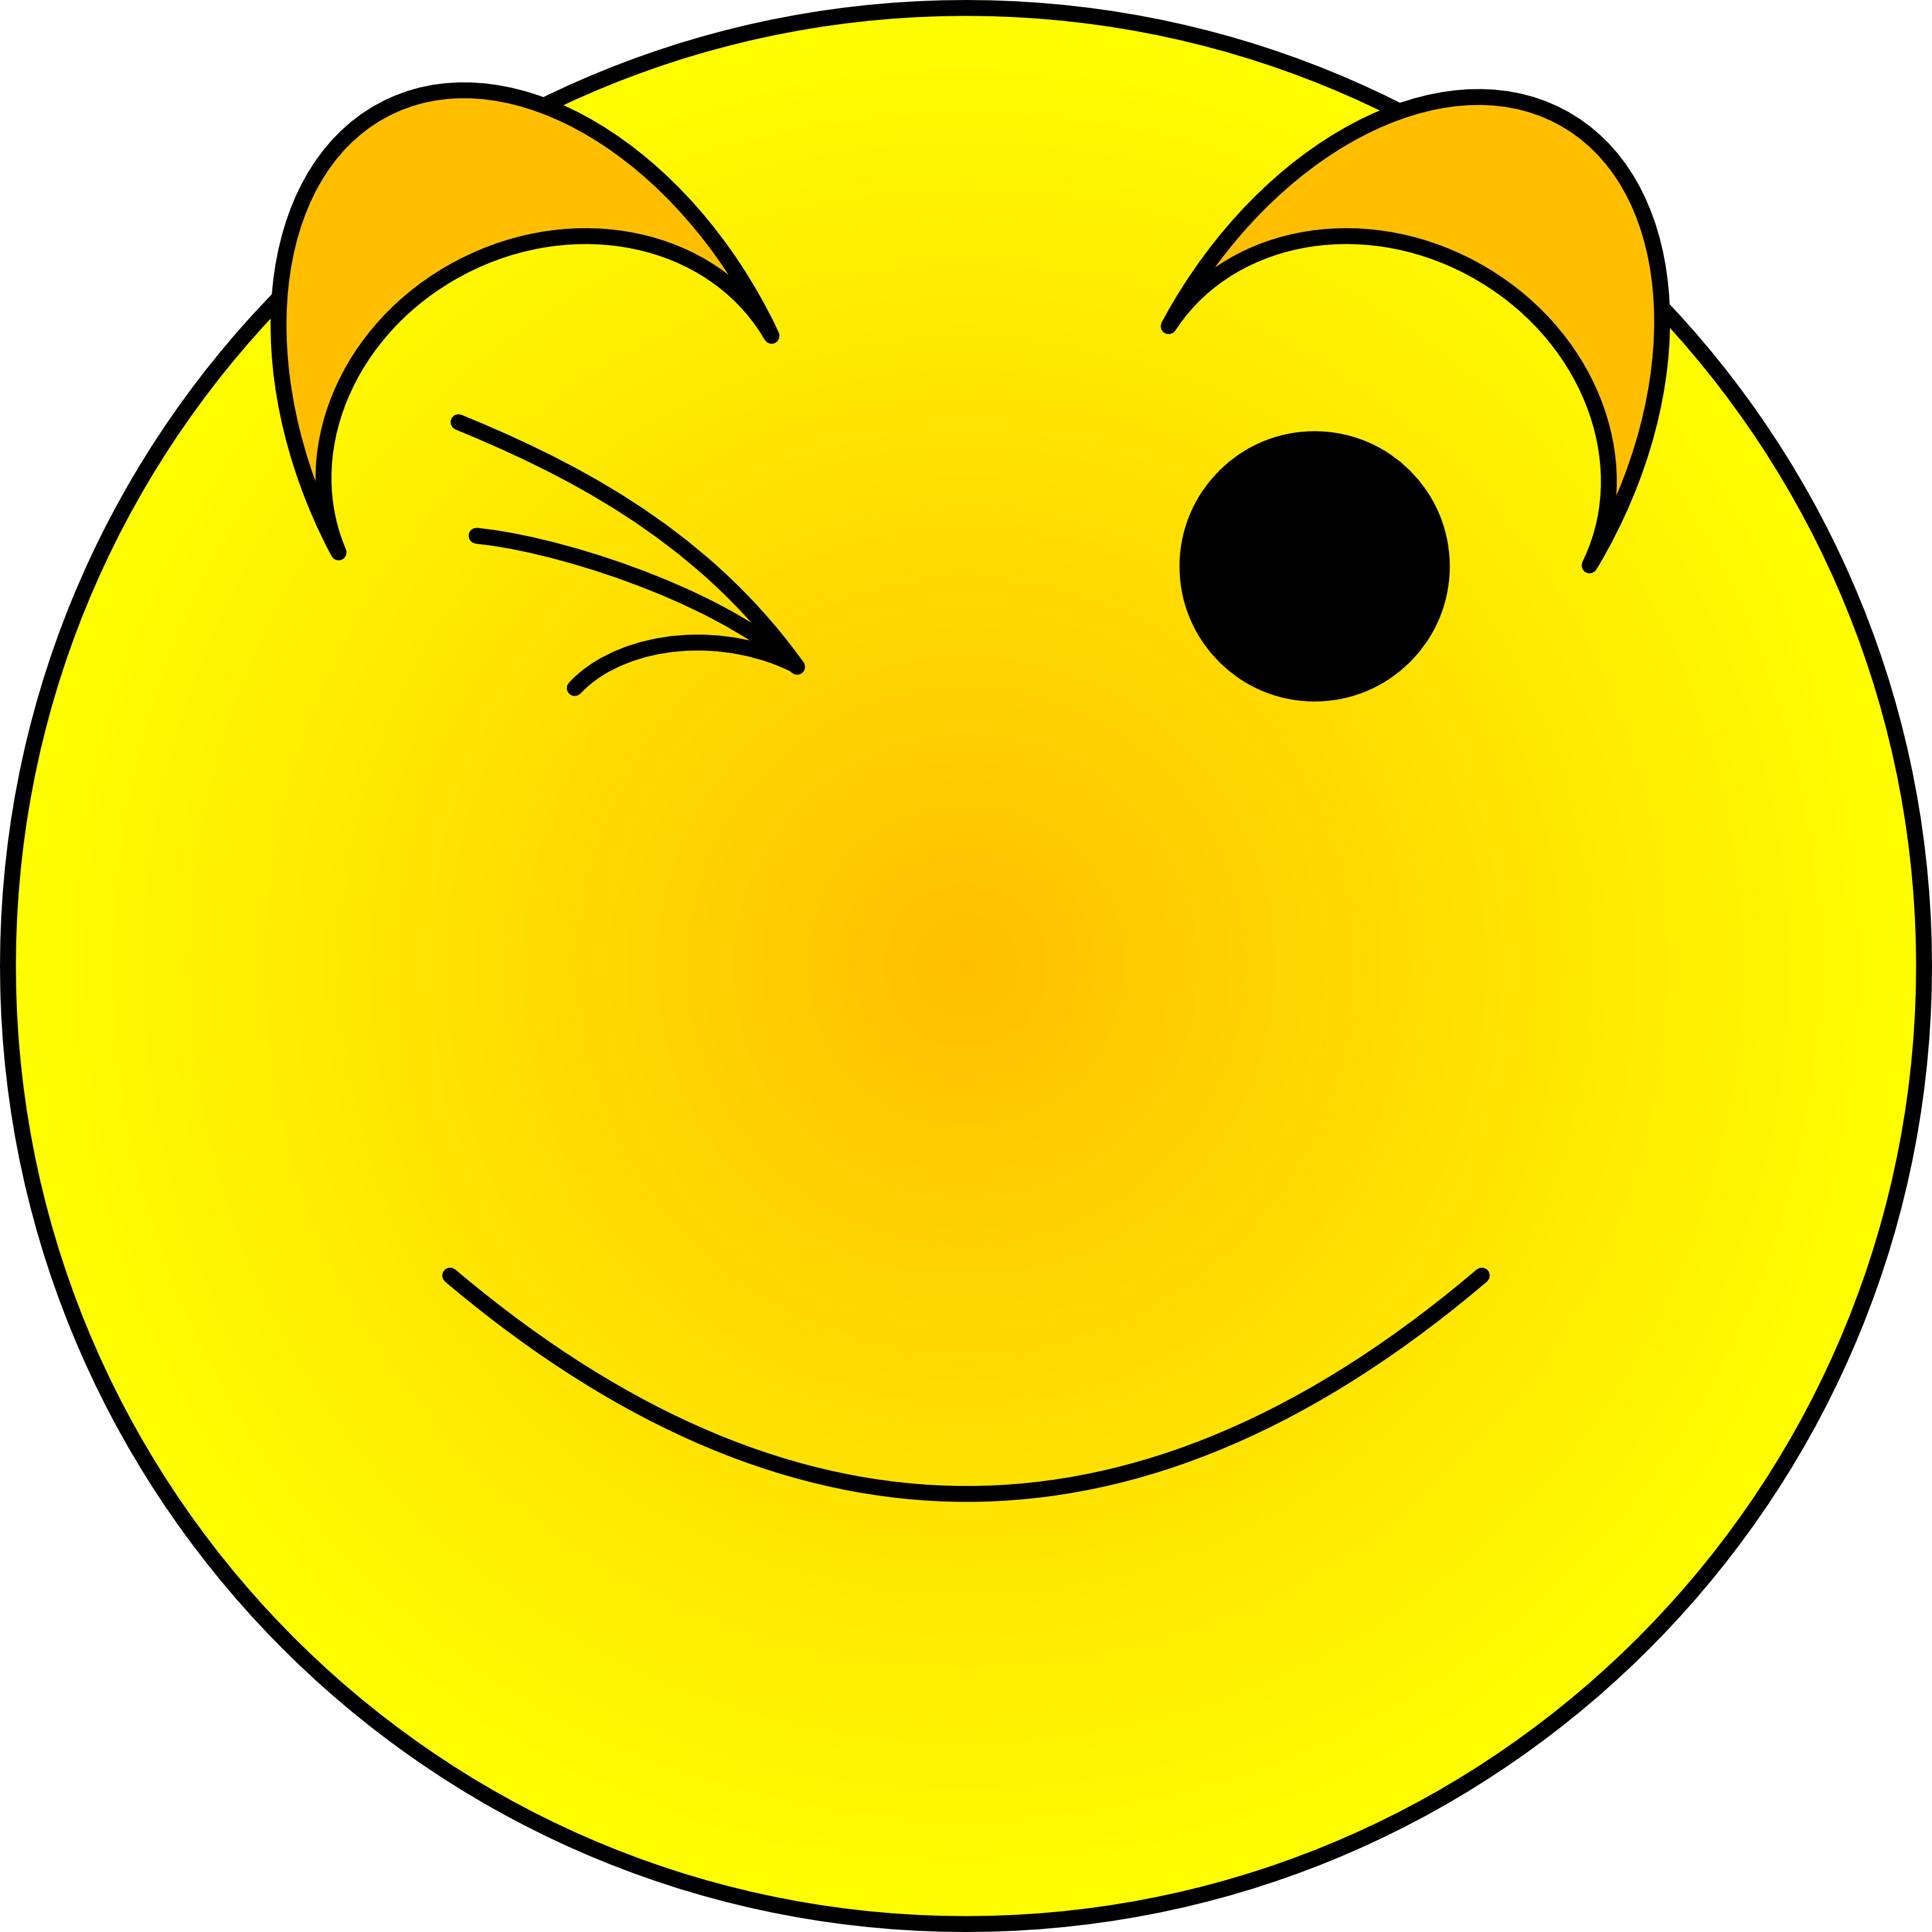 free clipart images smiley faces - photo #25